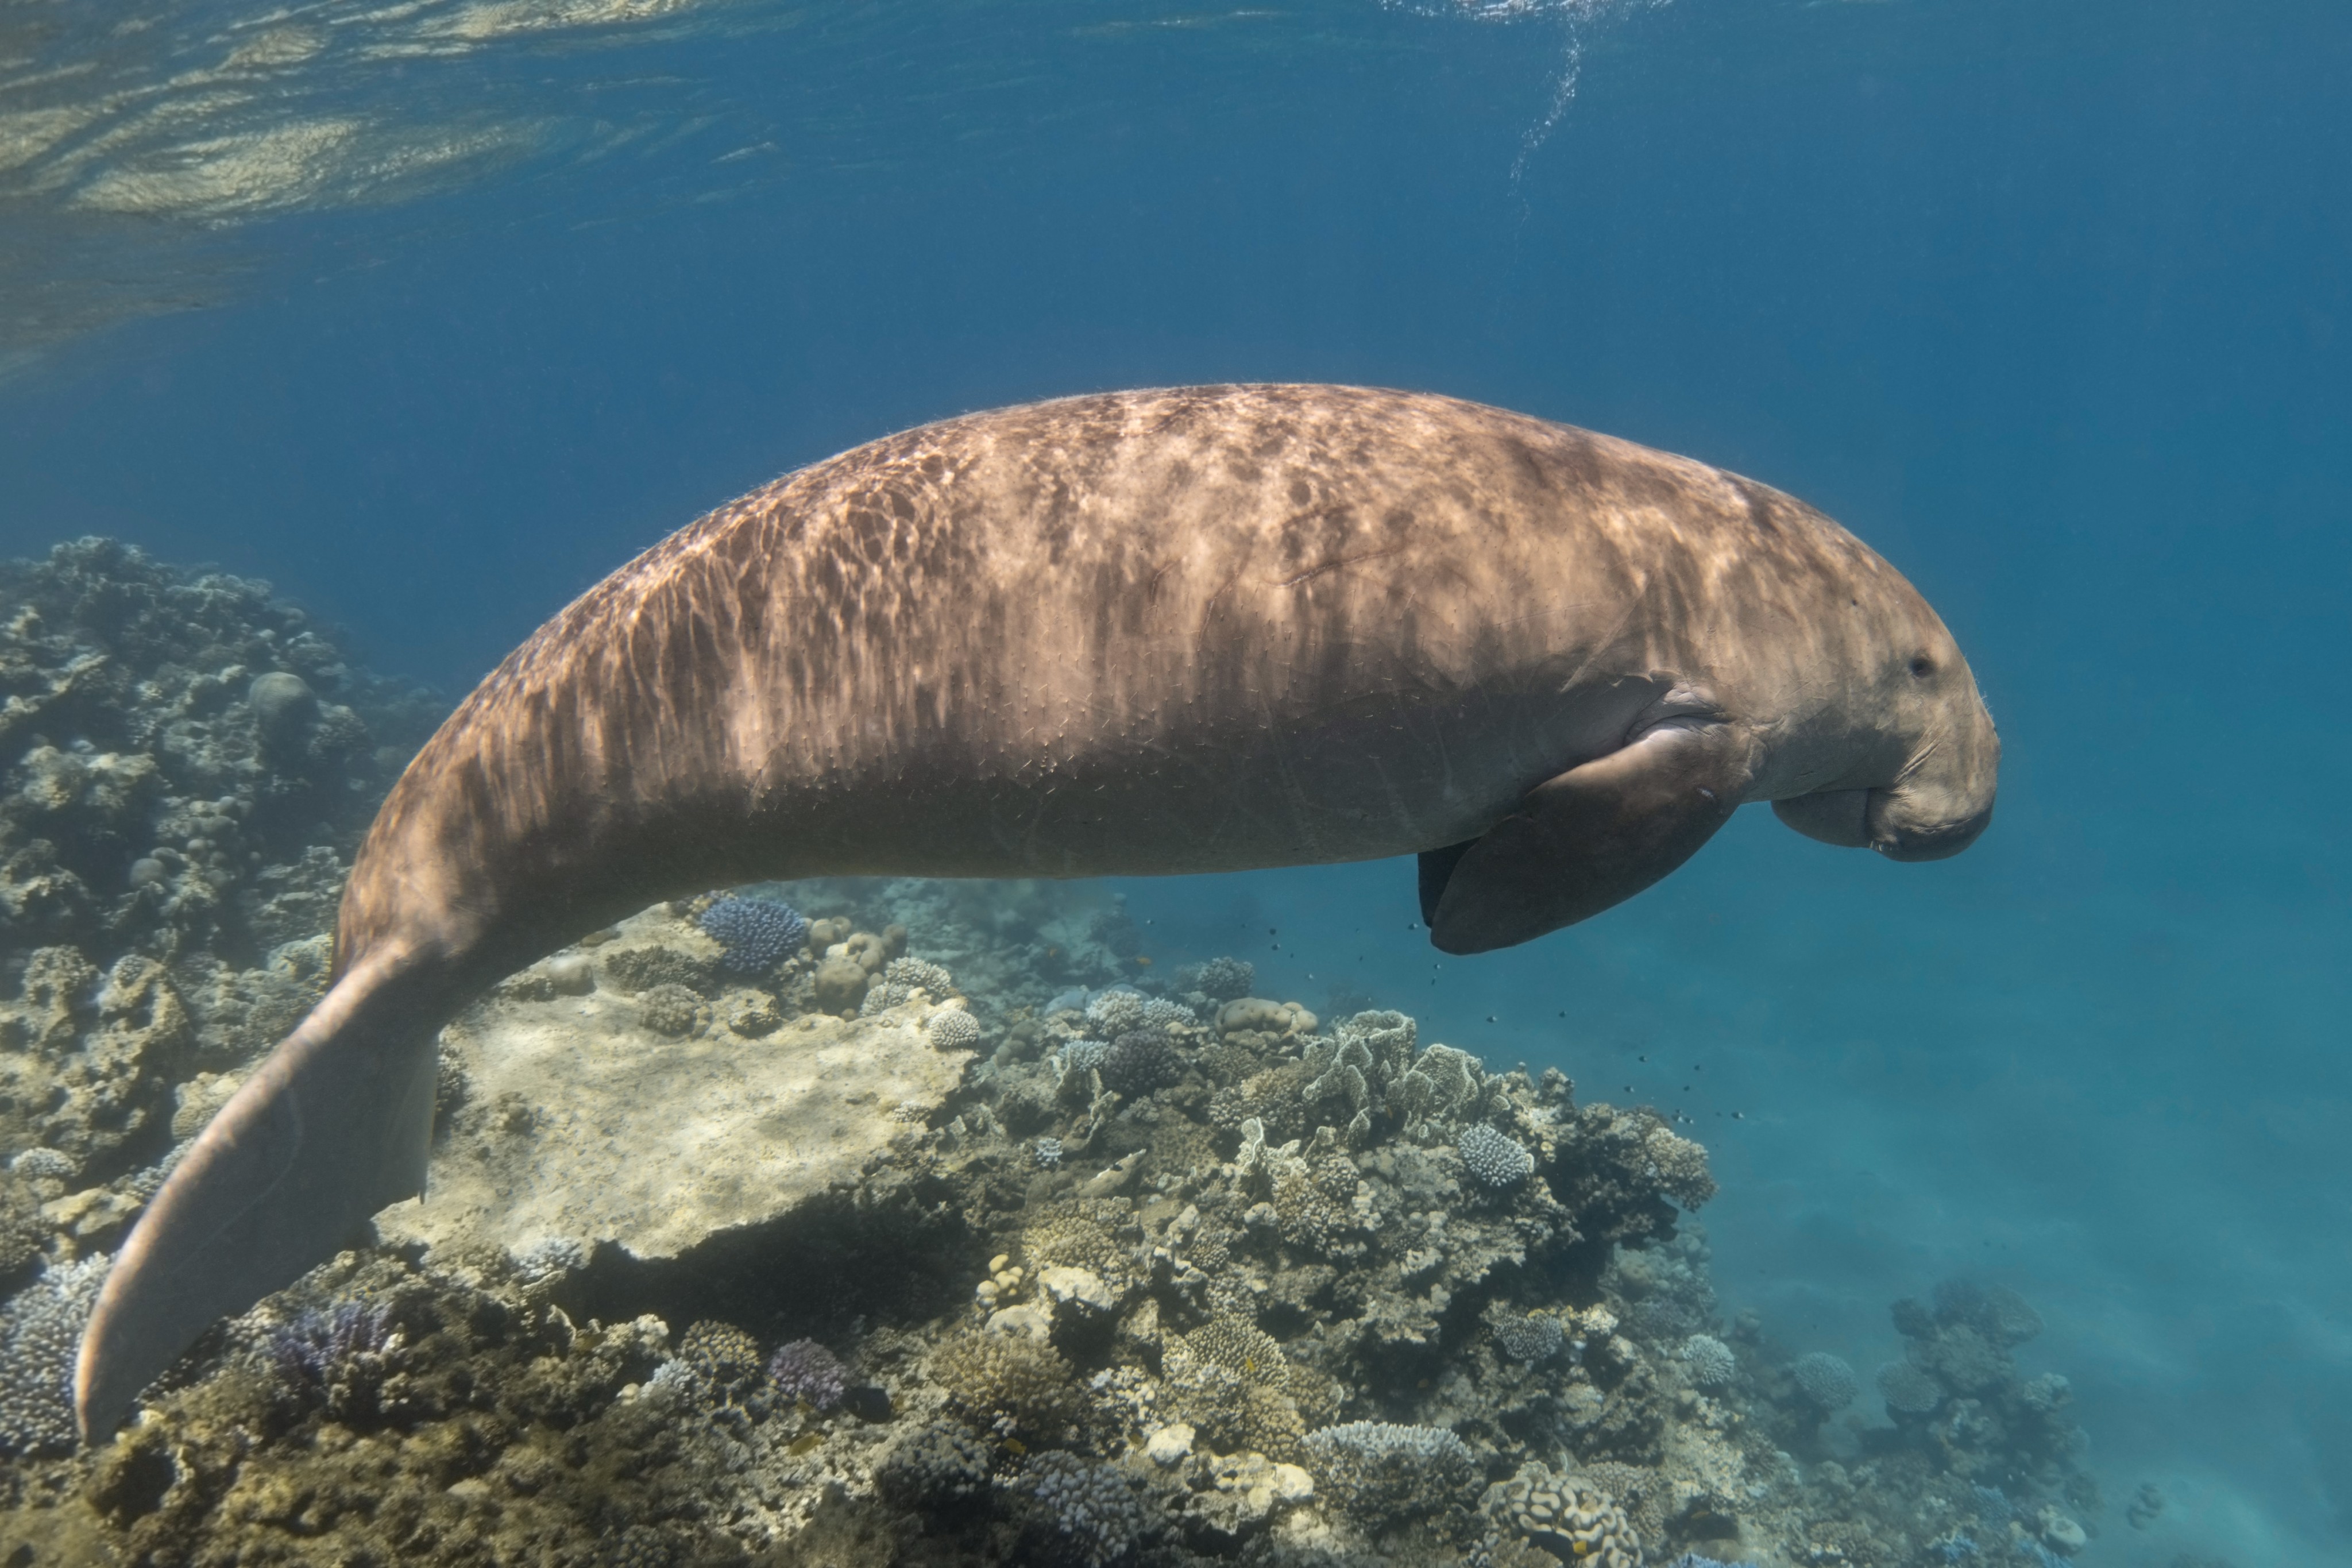 The dugong, a shy, benign snub-nosed marine mammal and cousin of the manatee, has vanished from the waters around the Andaman Sea island. Photo: Shutterstock